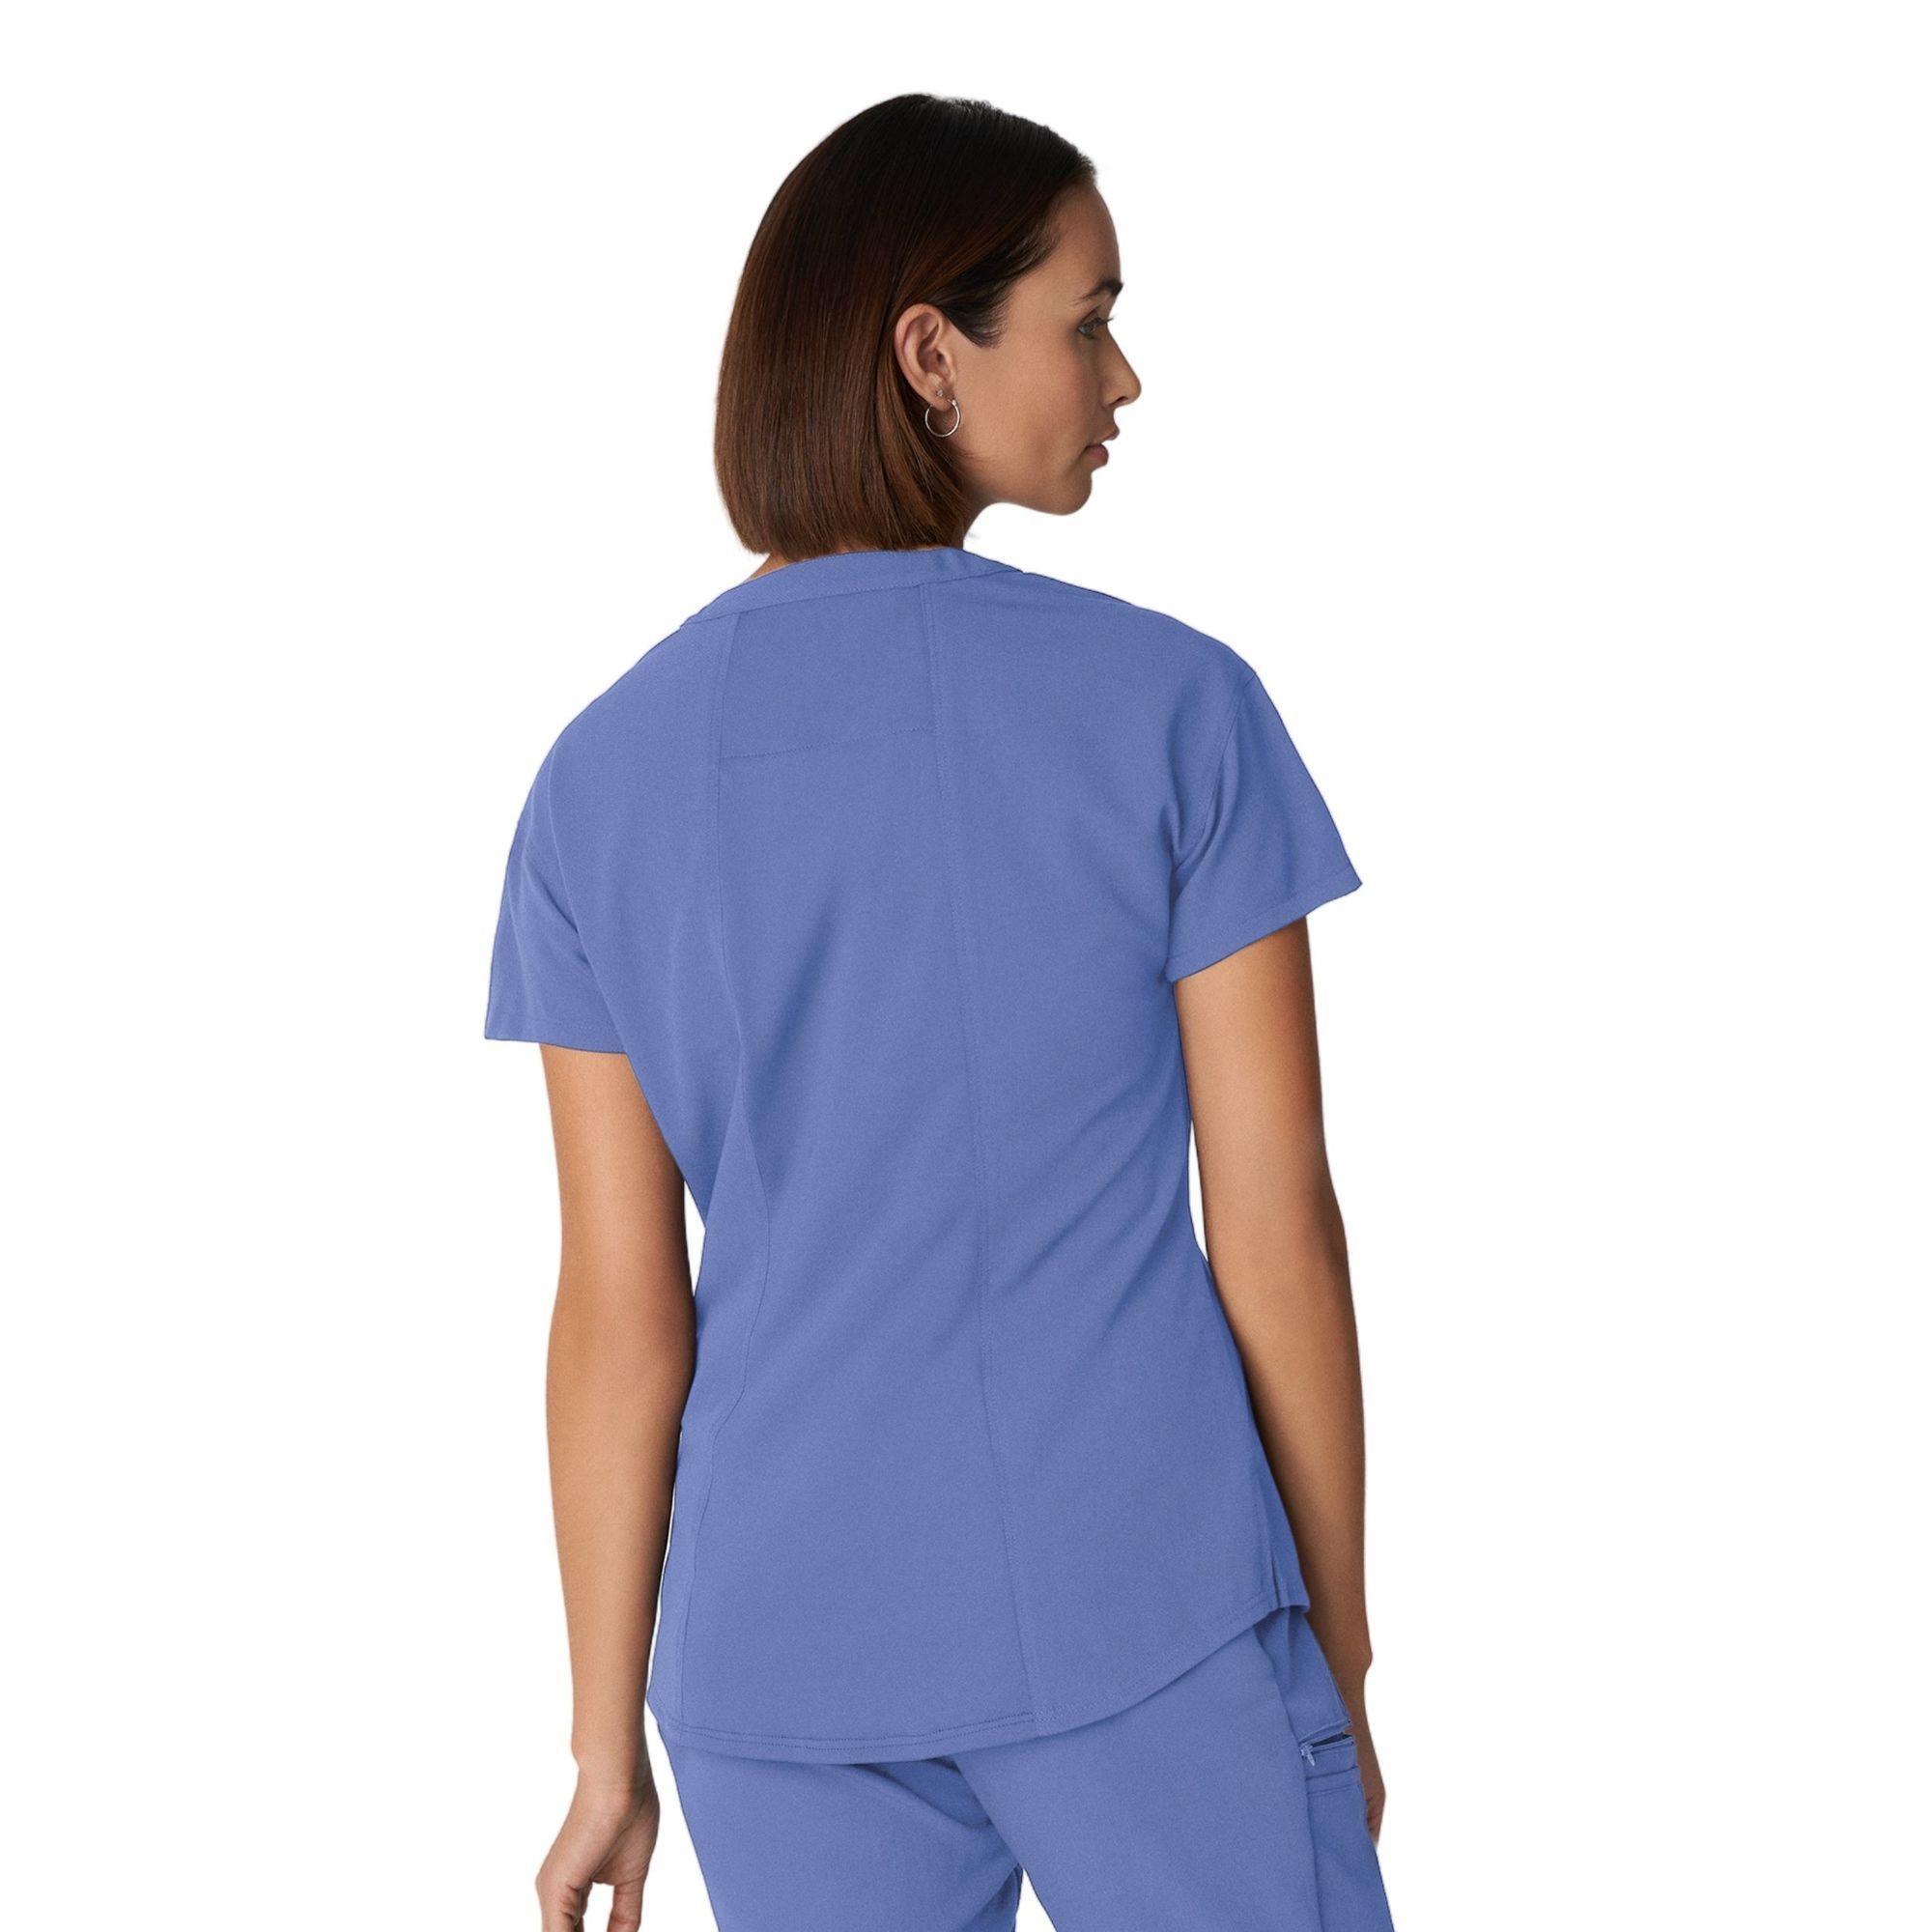 WT114 White Cross V-Neck Top With Contrast Back Panel – Scrubs4U